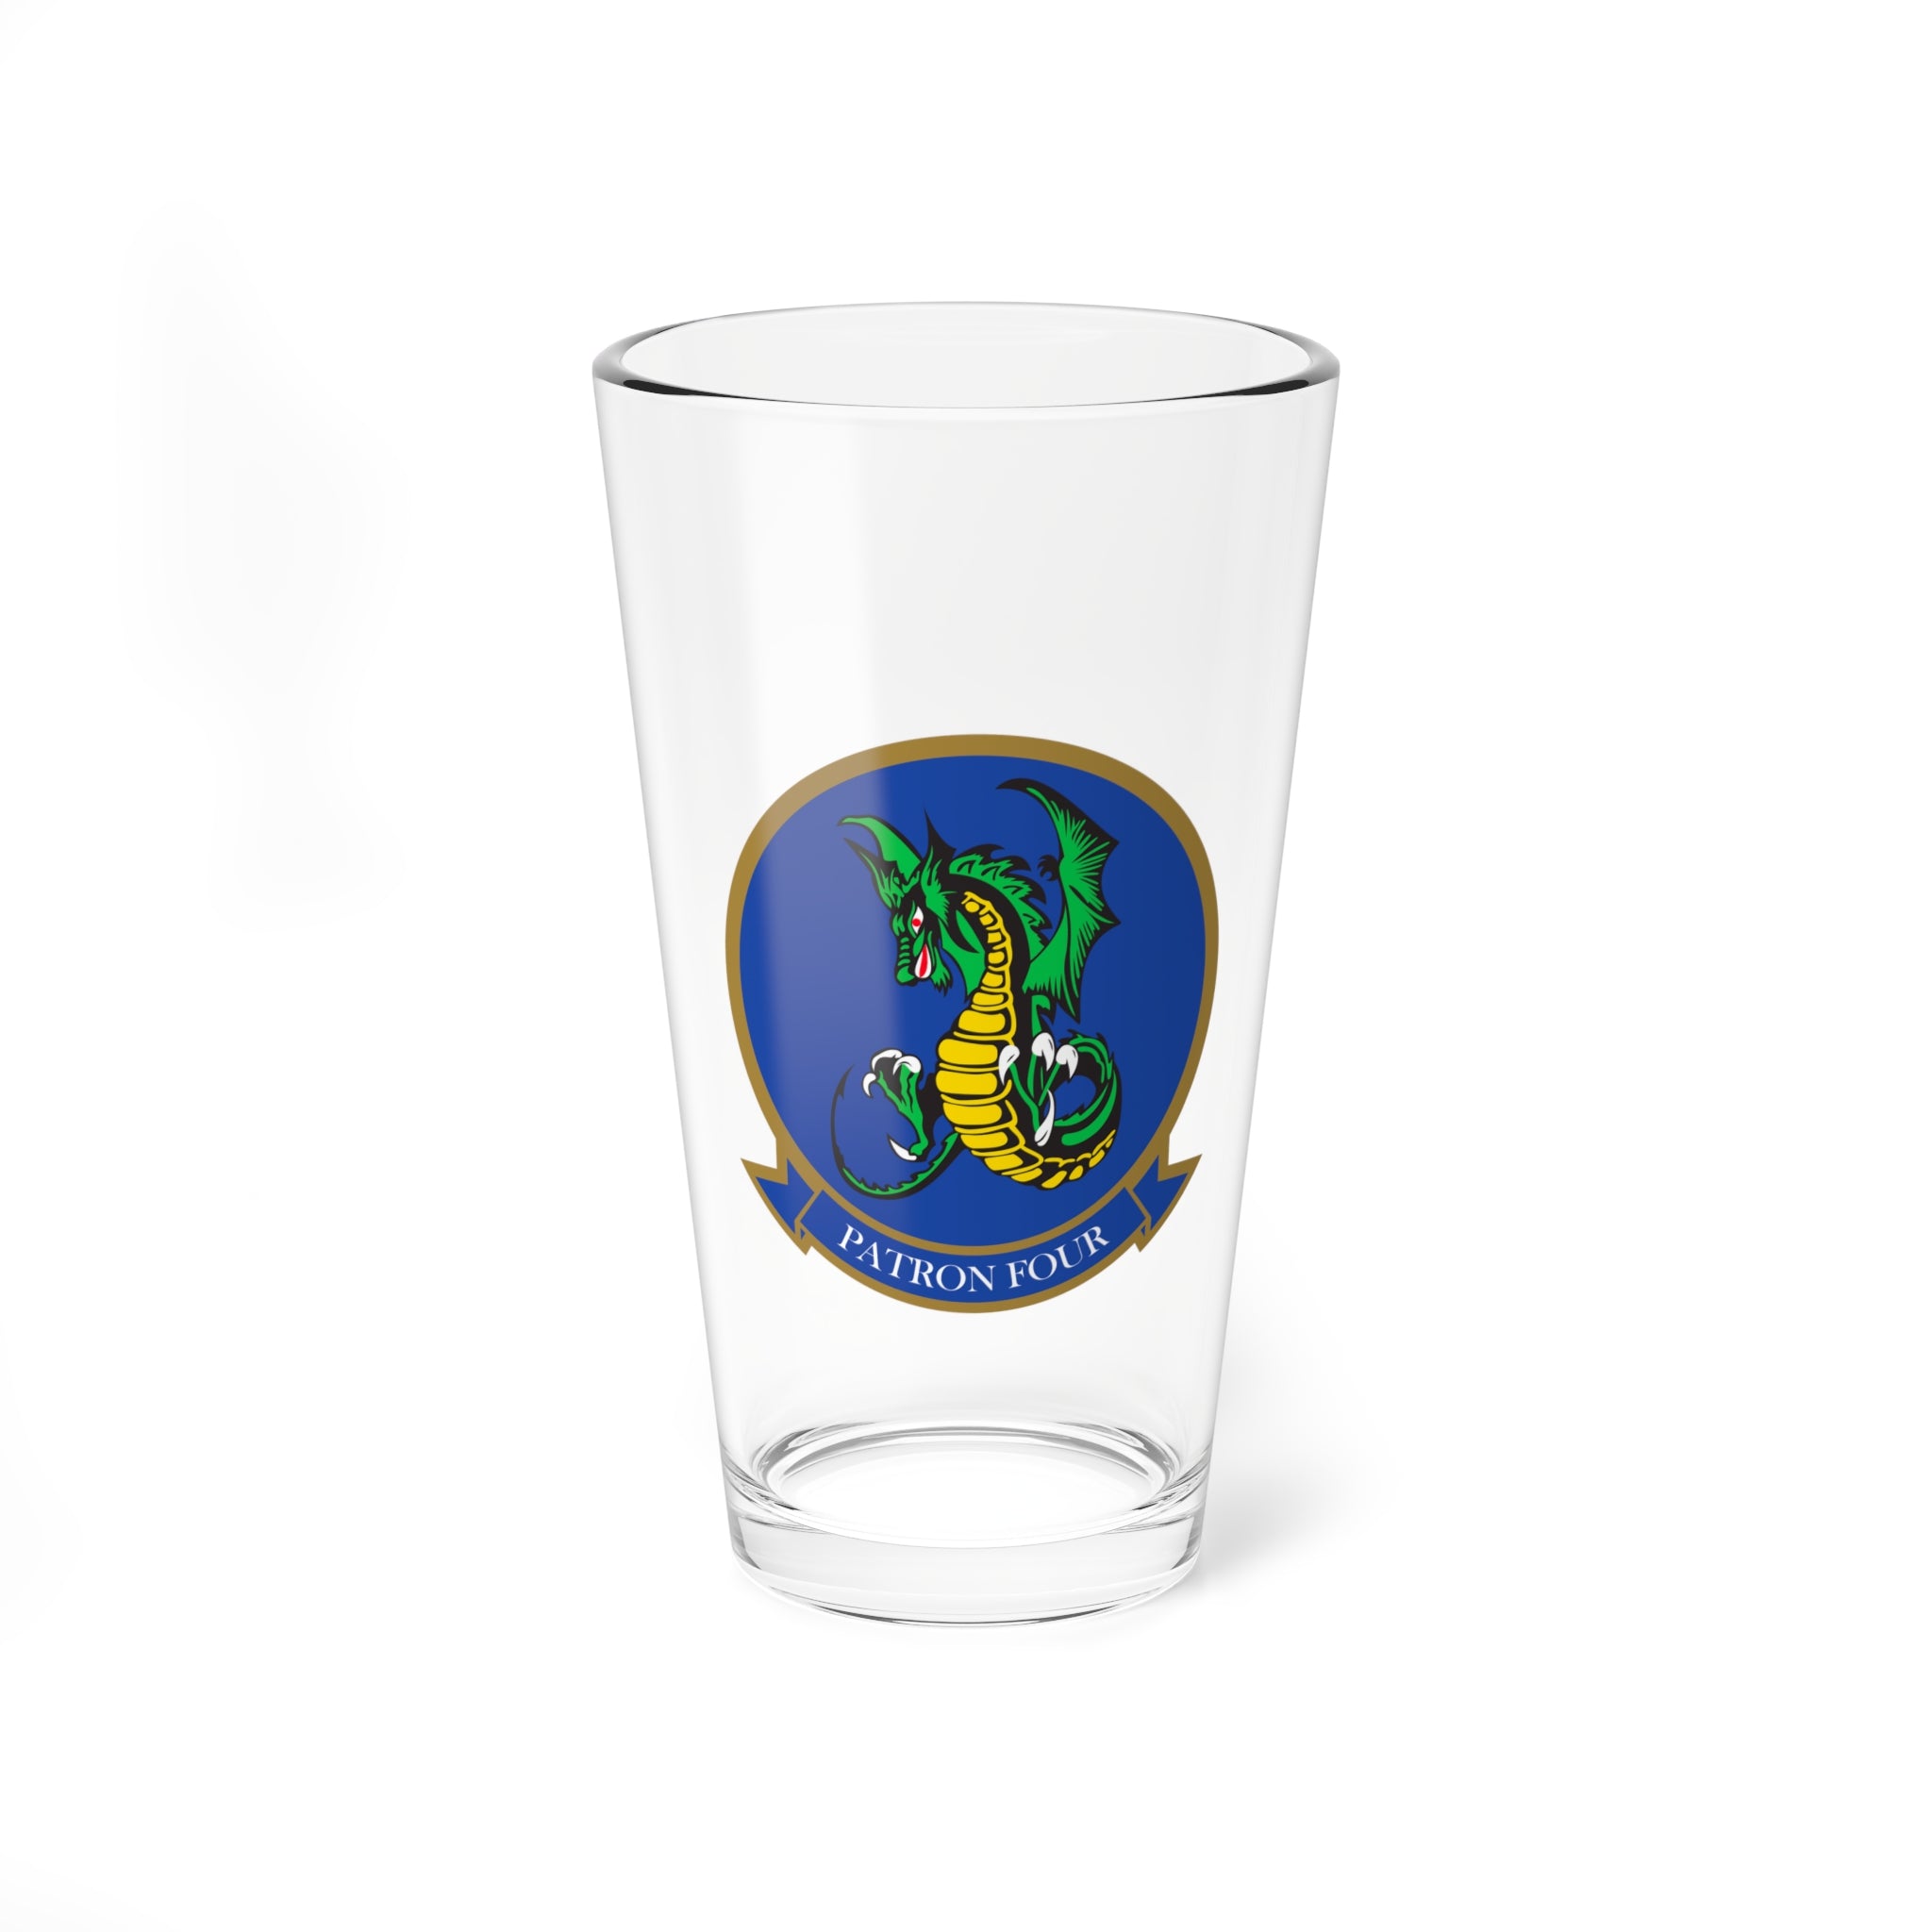 VP-4 "Skinny Dragons" -no wings- Pint Glass, 16oz, Navy Maritime Patrol Squadron flying the P-3 Orion and P-8 Poseidon